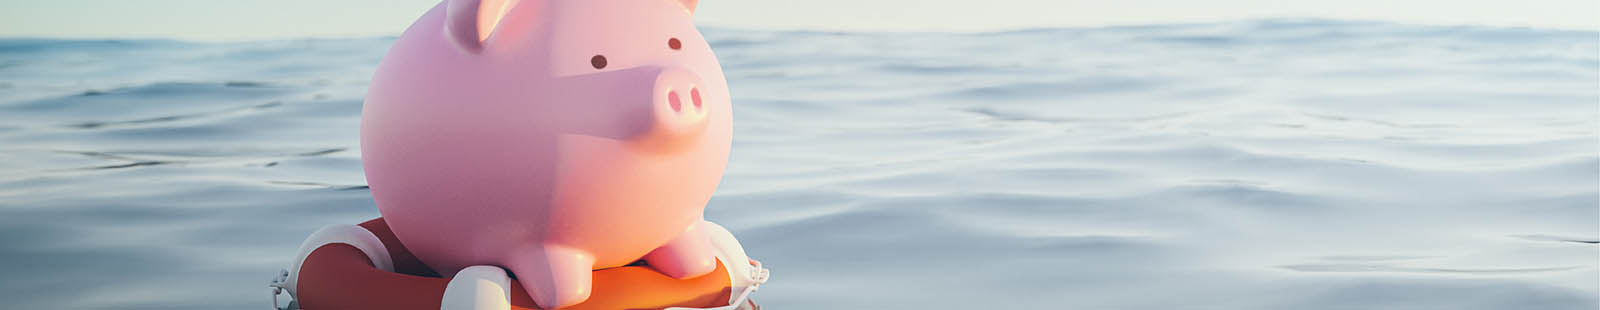 Piggy bank on life preserver in water.